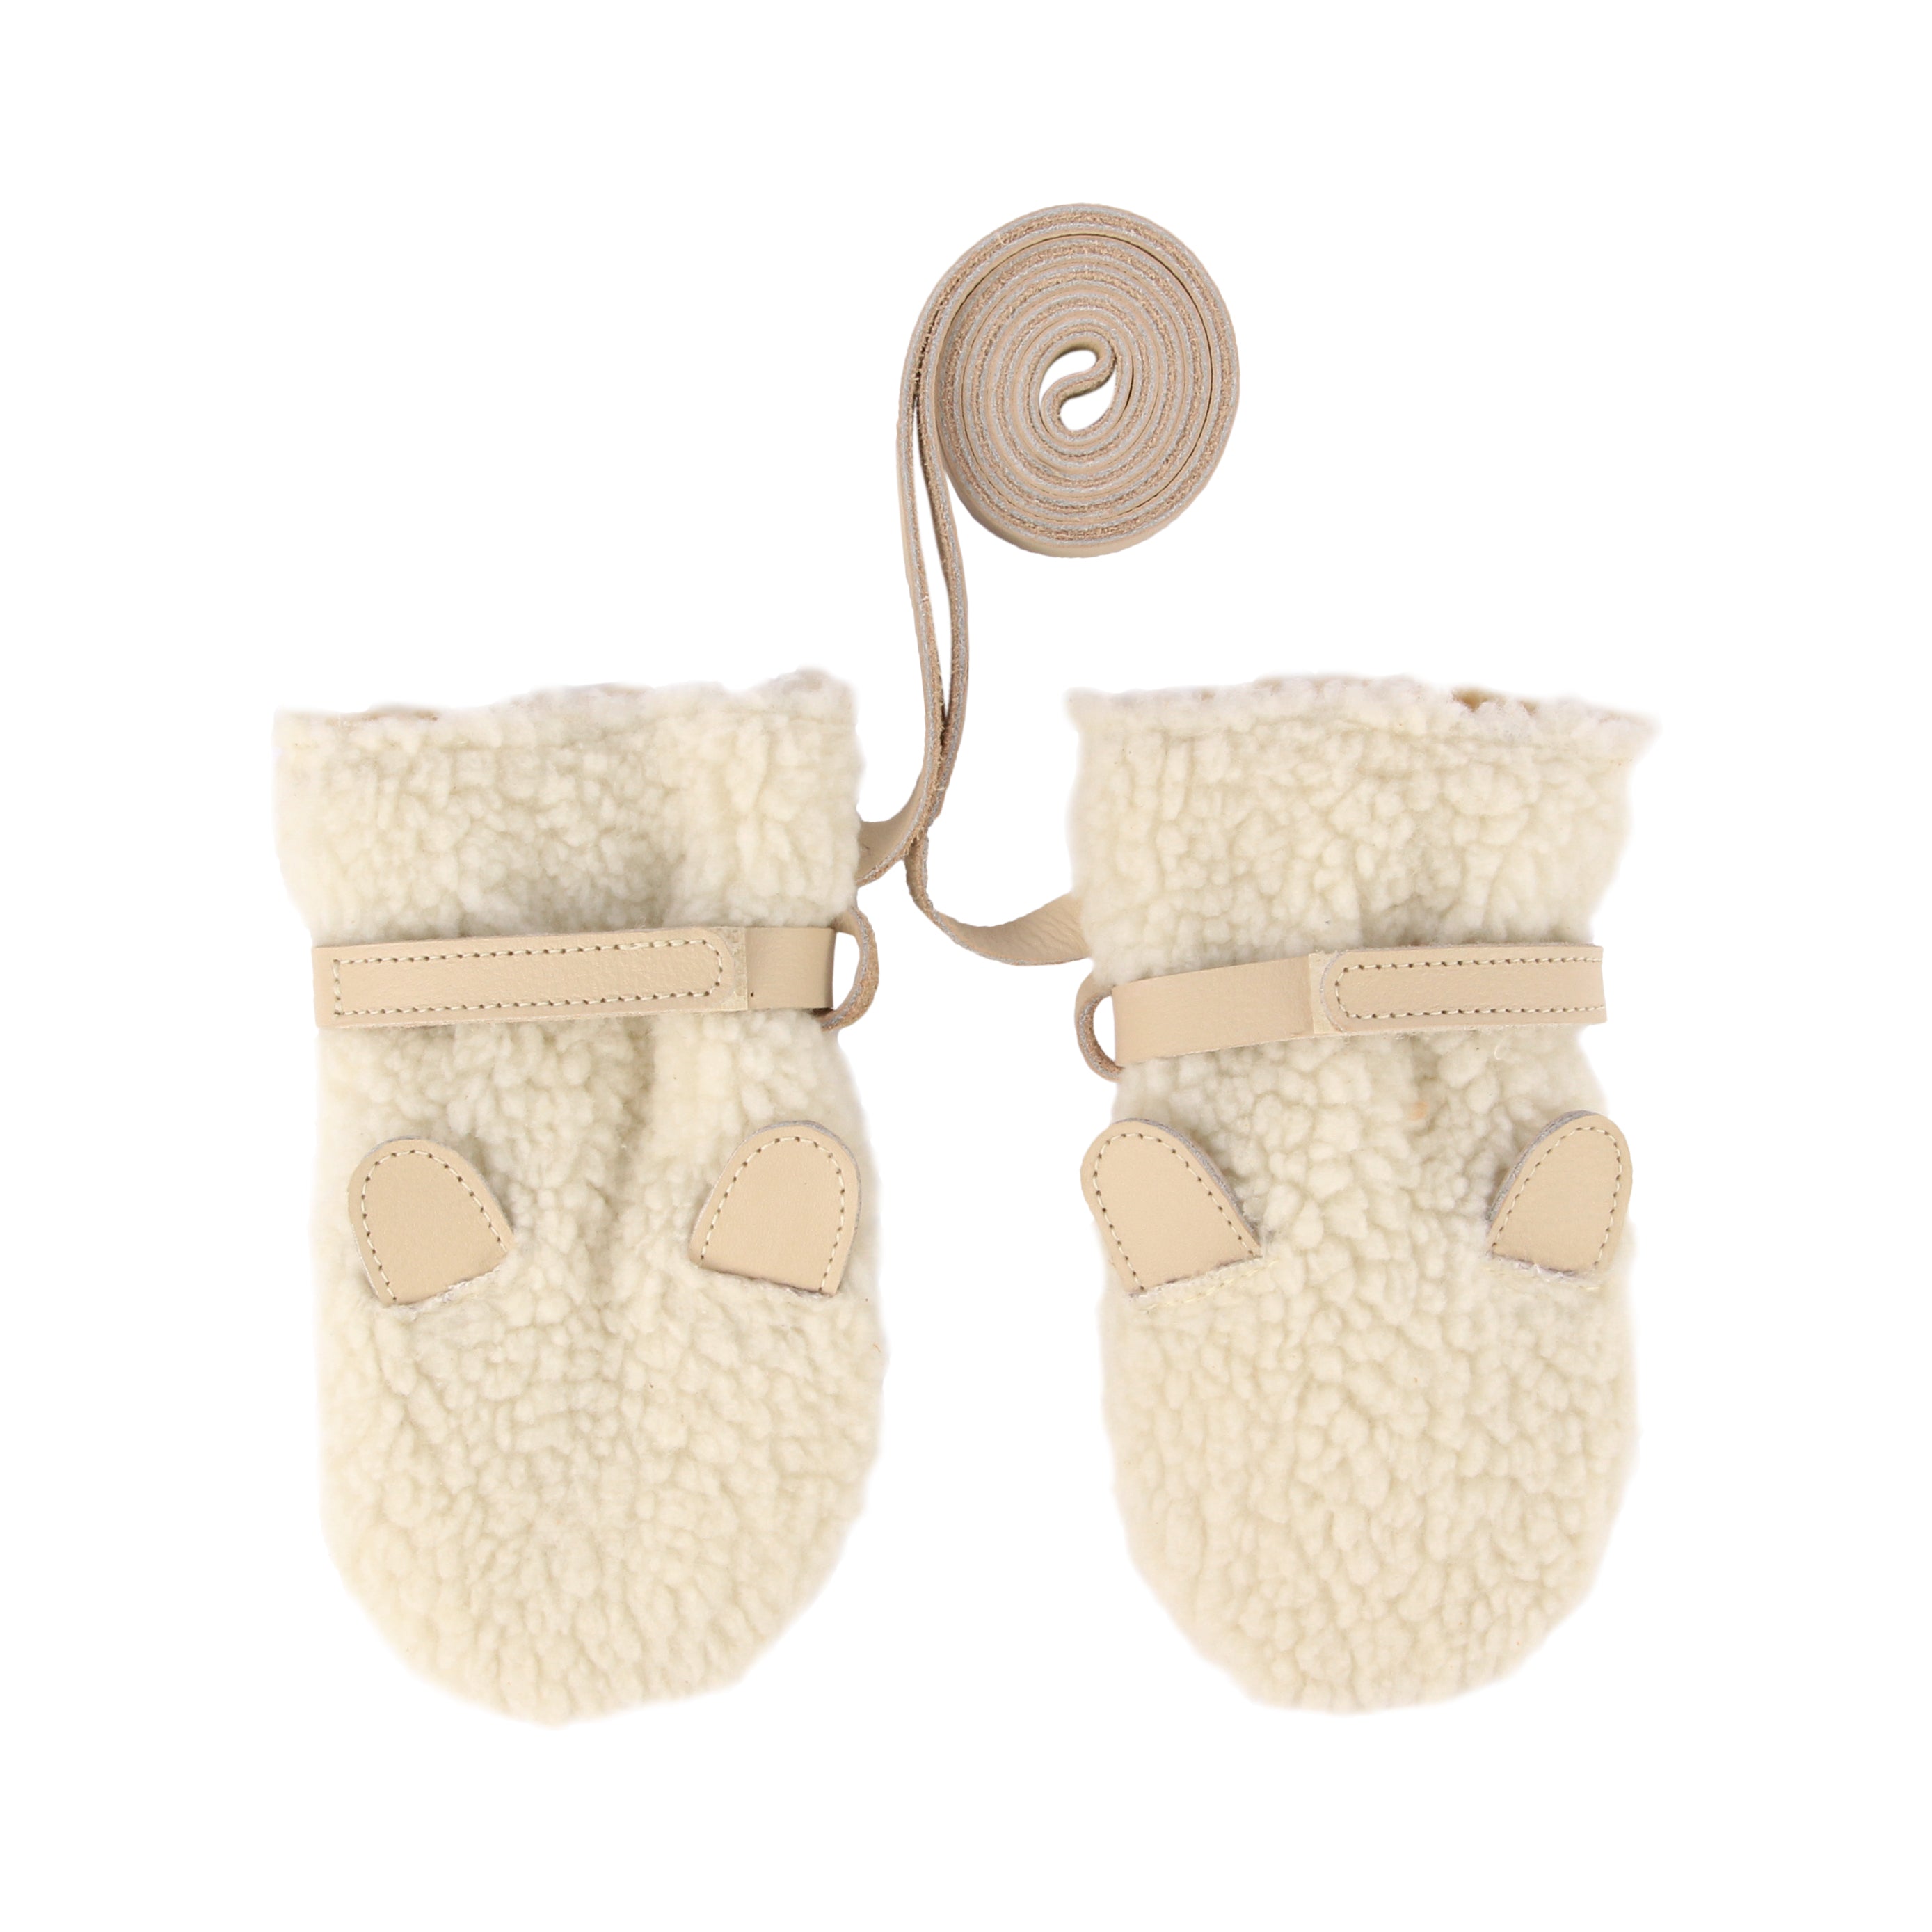 Leather and Faux Fur Mitts for Babies at Bonjour Baby Baskets